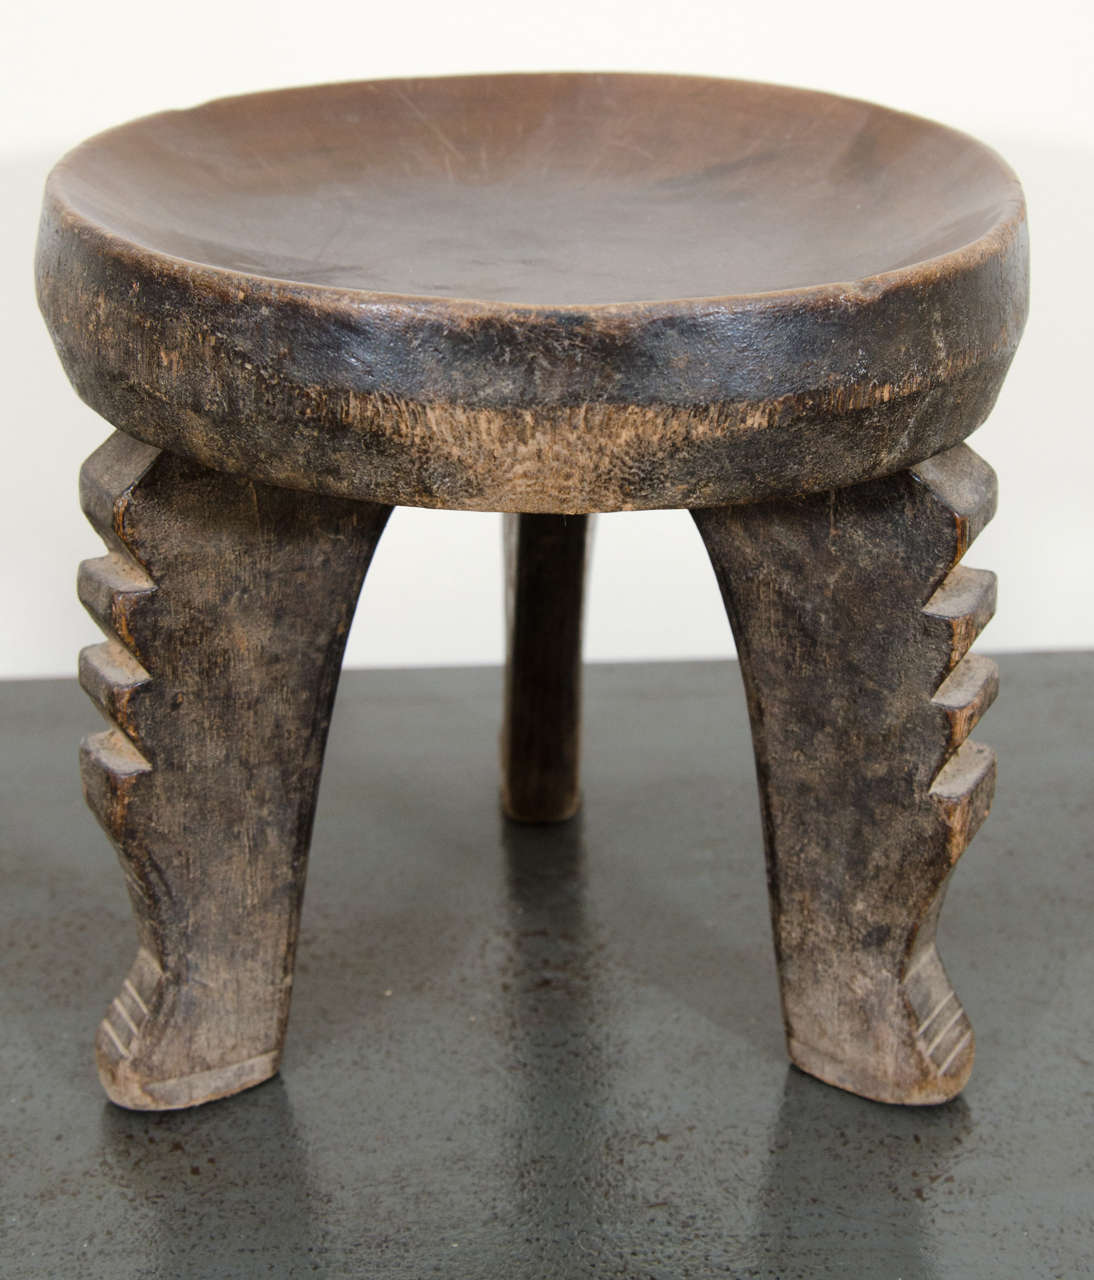 A graphic Hehe stool with three ridged legs and old patina of use.

The Hehe people lived in isolation on a highland in southwestern Tanzania, northeast of Lake Nyasa. With the exception of some pastoralists on the plains and some keeping a